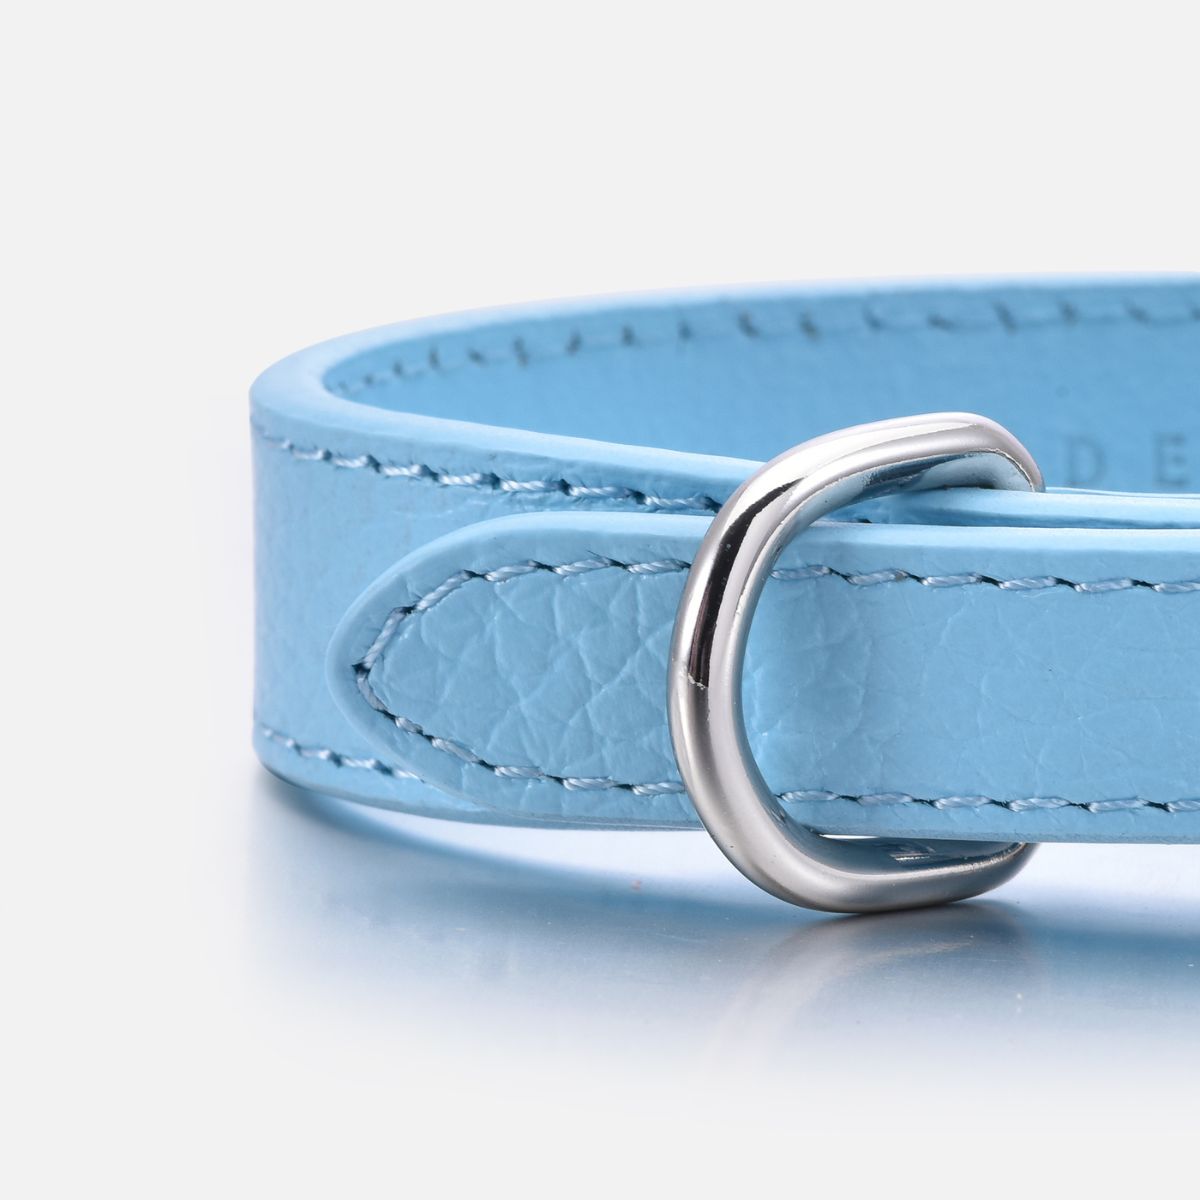 Collier pour chien Baby Blue Thin